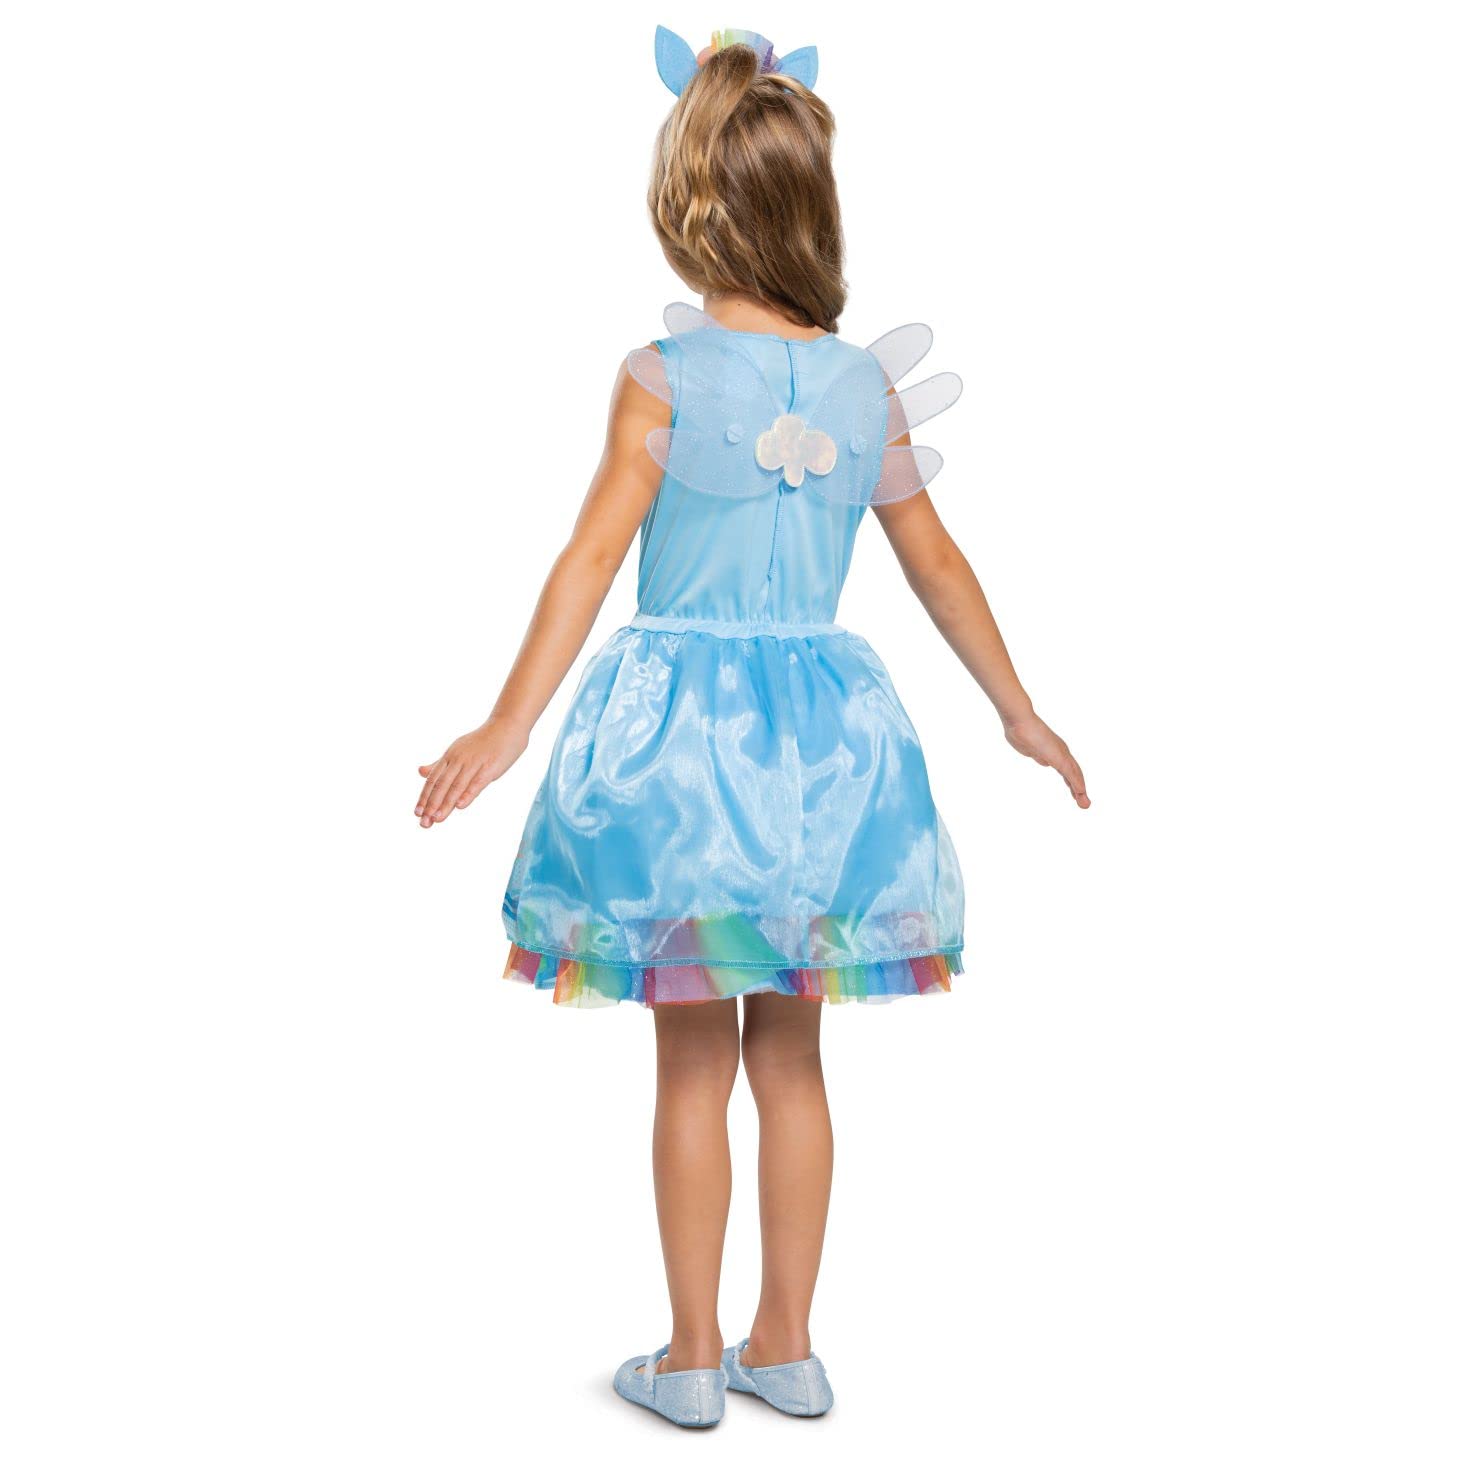 Rainbow Dash My Little Pony Costume for Girls, Children's Character Dress Outfit